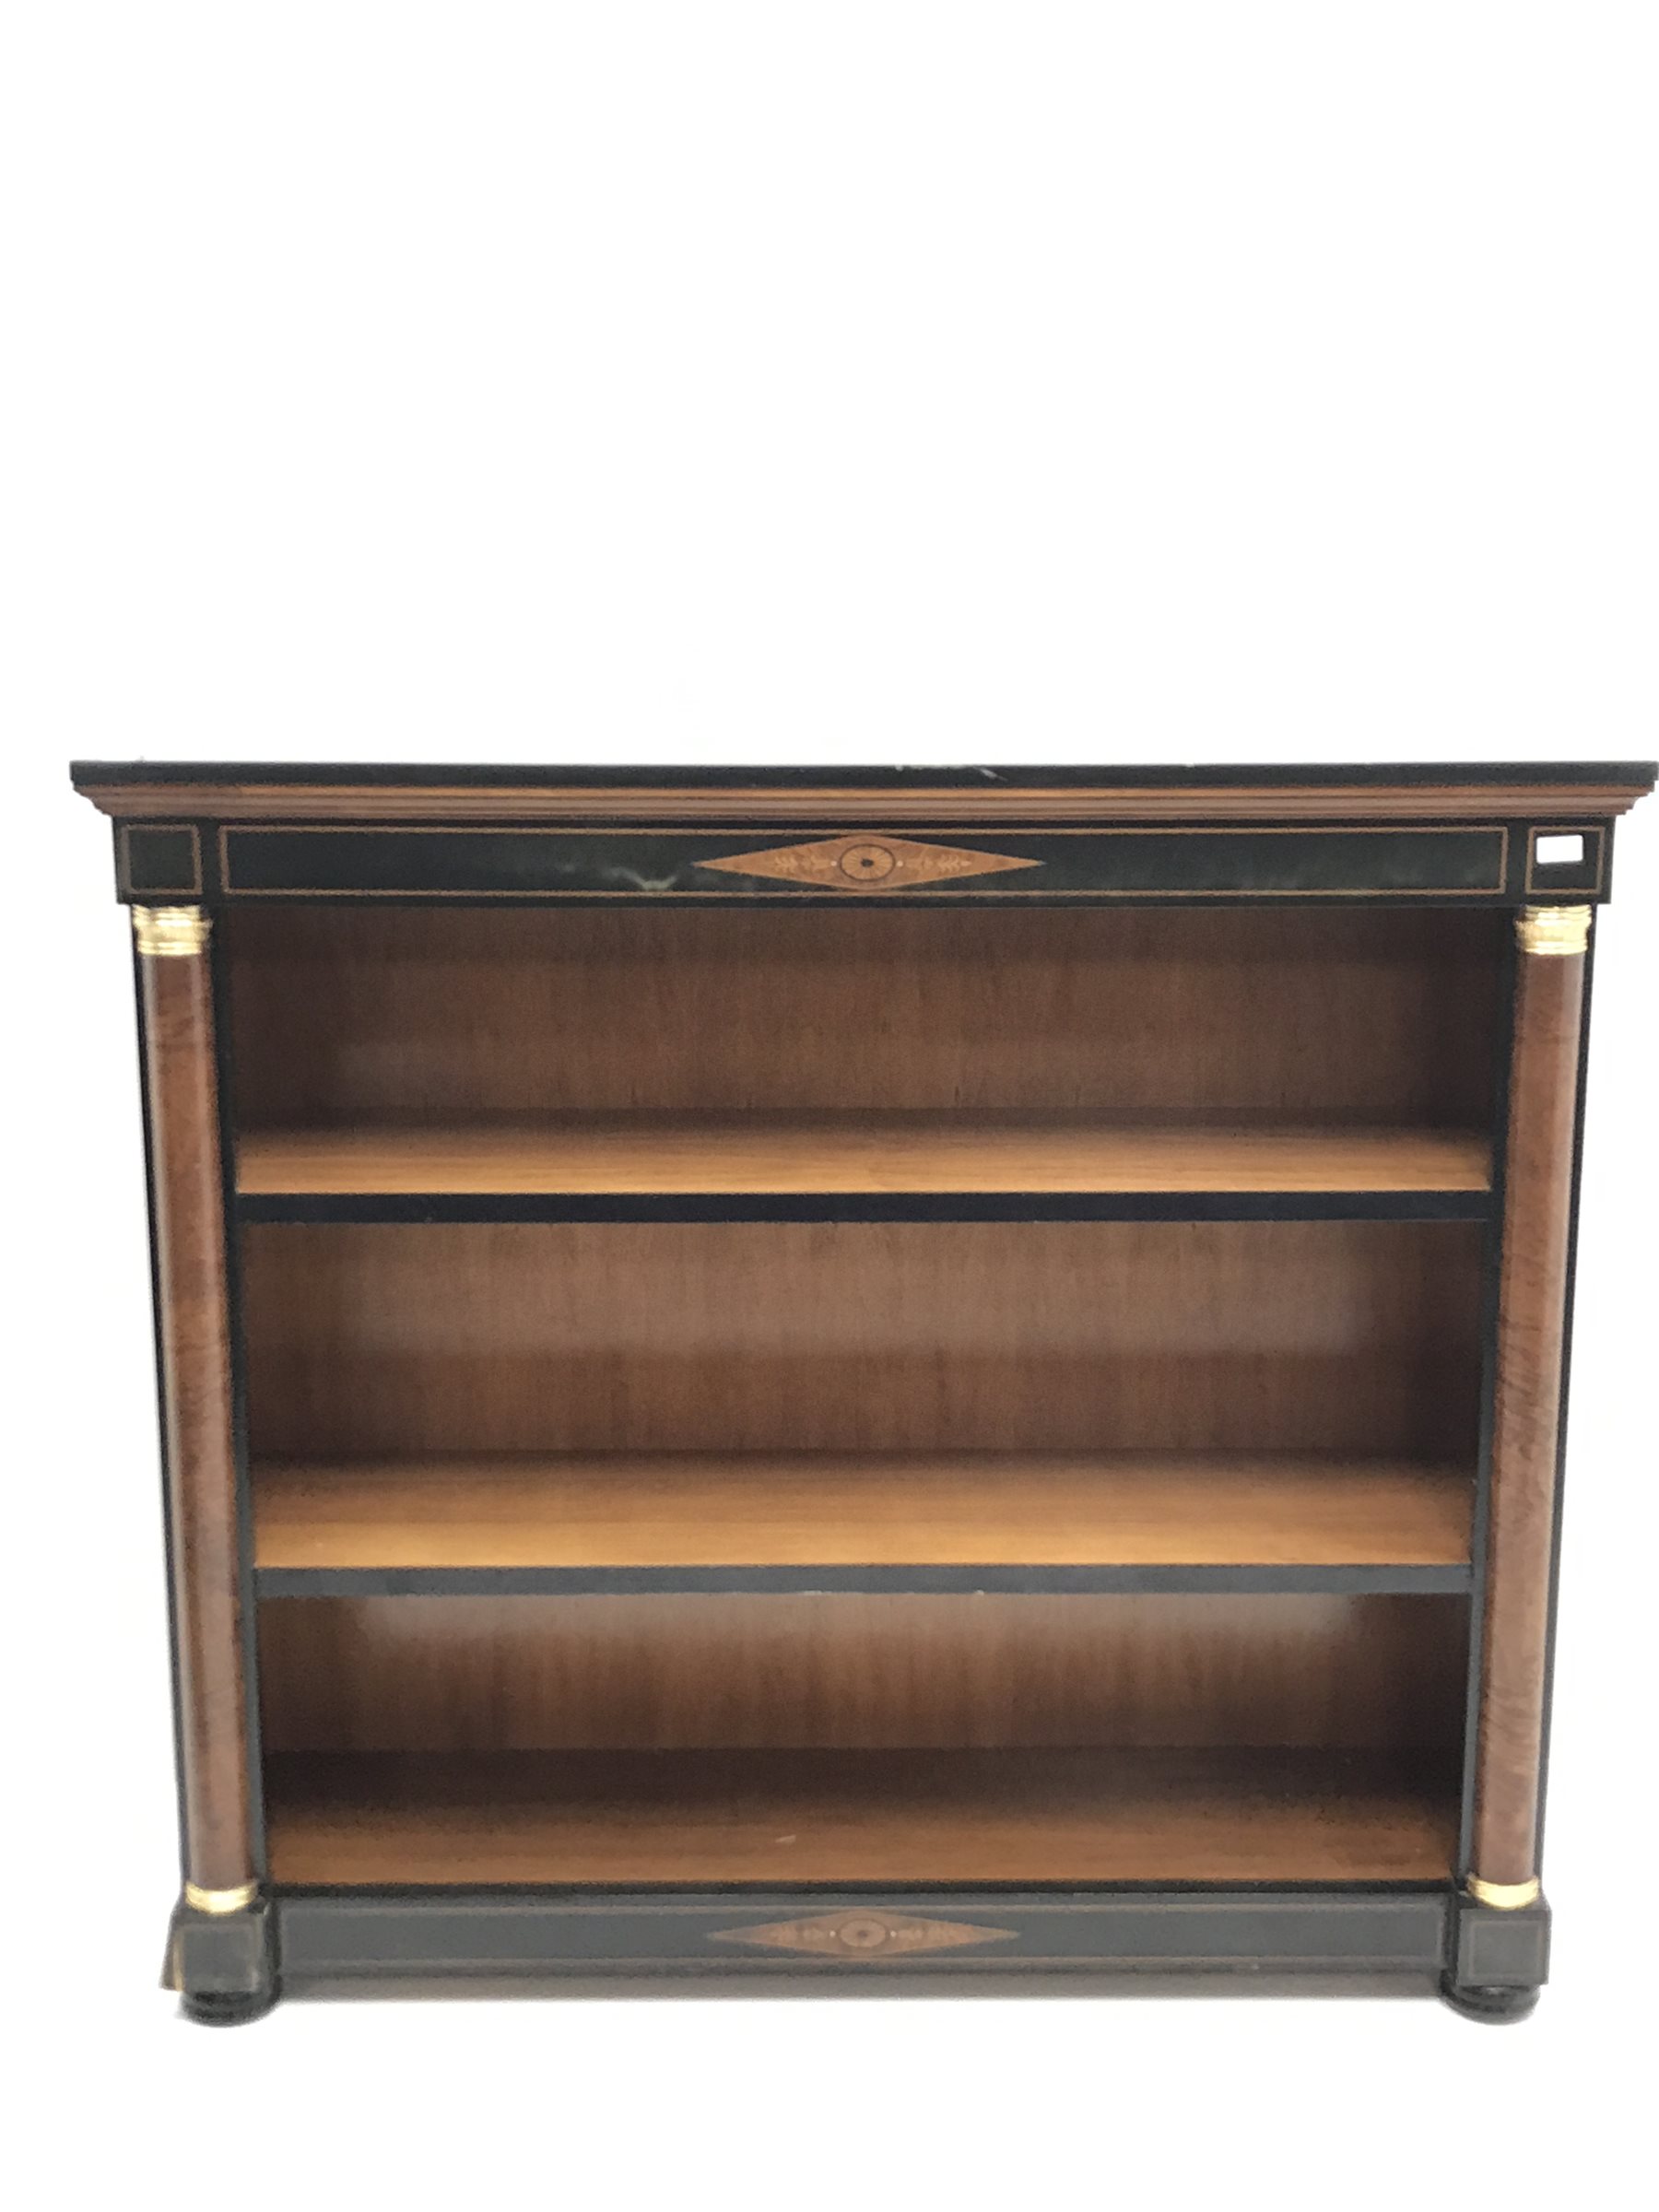 Empire style inlaid ash curl open bookcase, projecting cornice, two adjustable shelves flanked by bl - Image 2 of 10